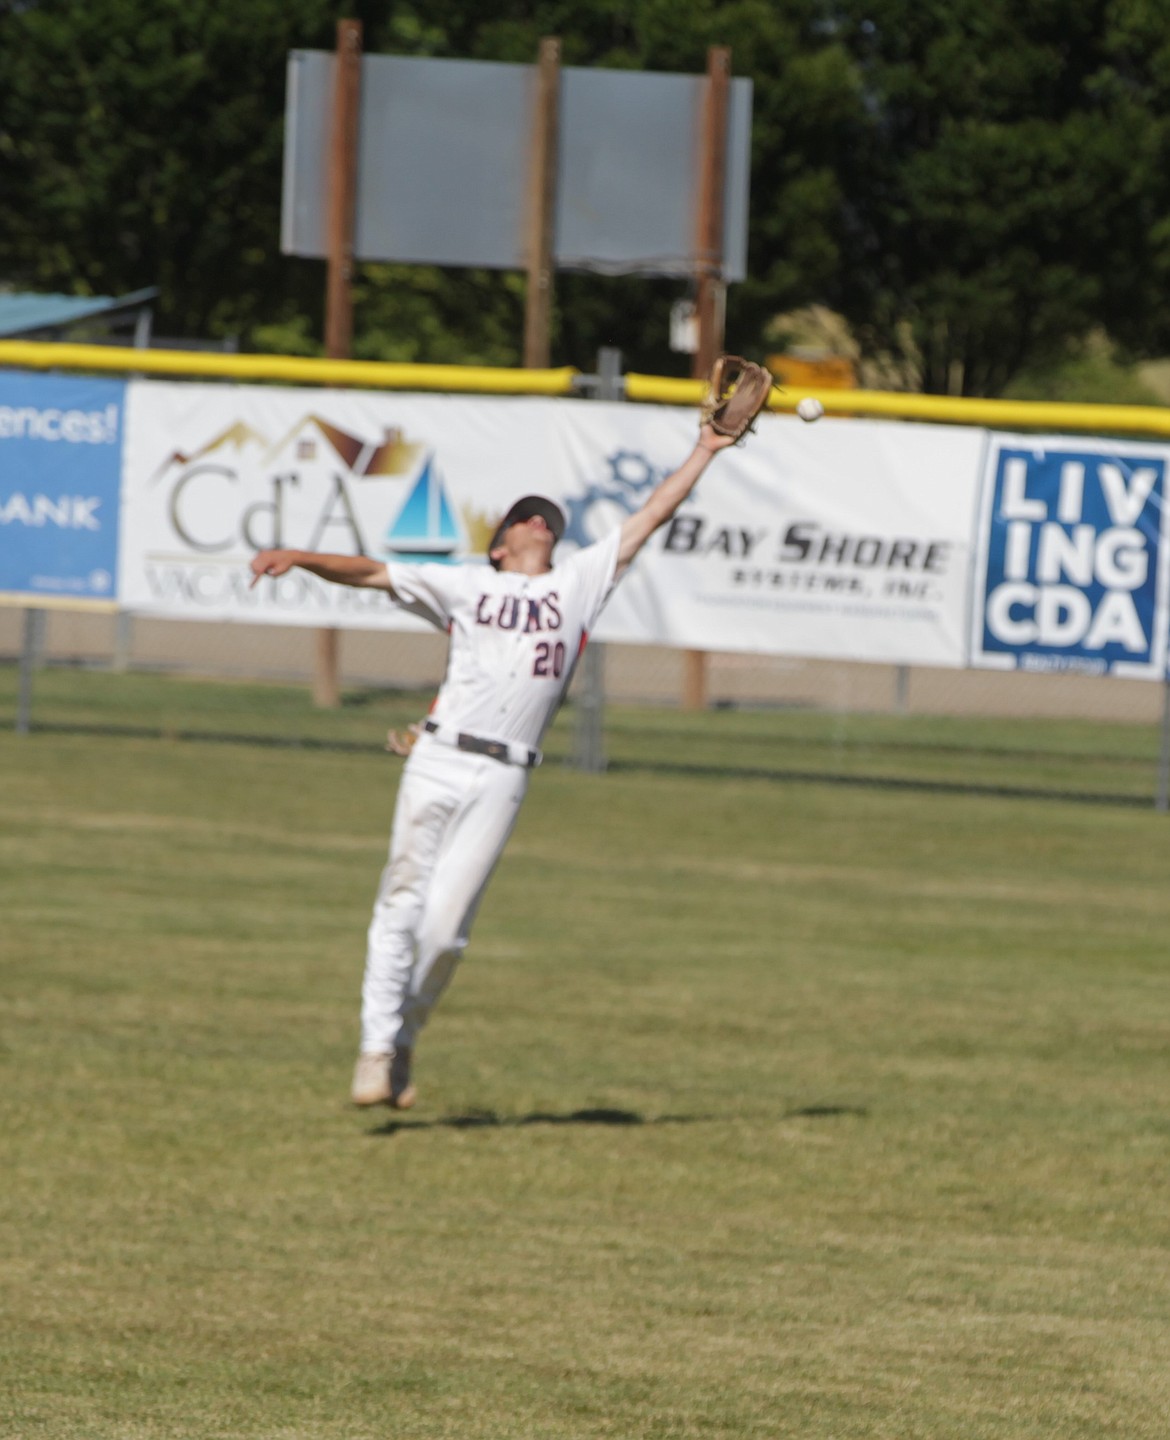 JASON ELLIOTT/Press
Coeur d'Alene Lumbermen right fielder Eric Bumbaugh attempts to catch a fly ball during the third inning of Saturday's opening game in the Class AA Area A best-of-3 series at Thorco Field.